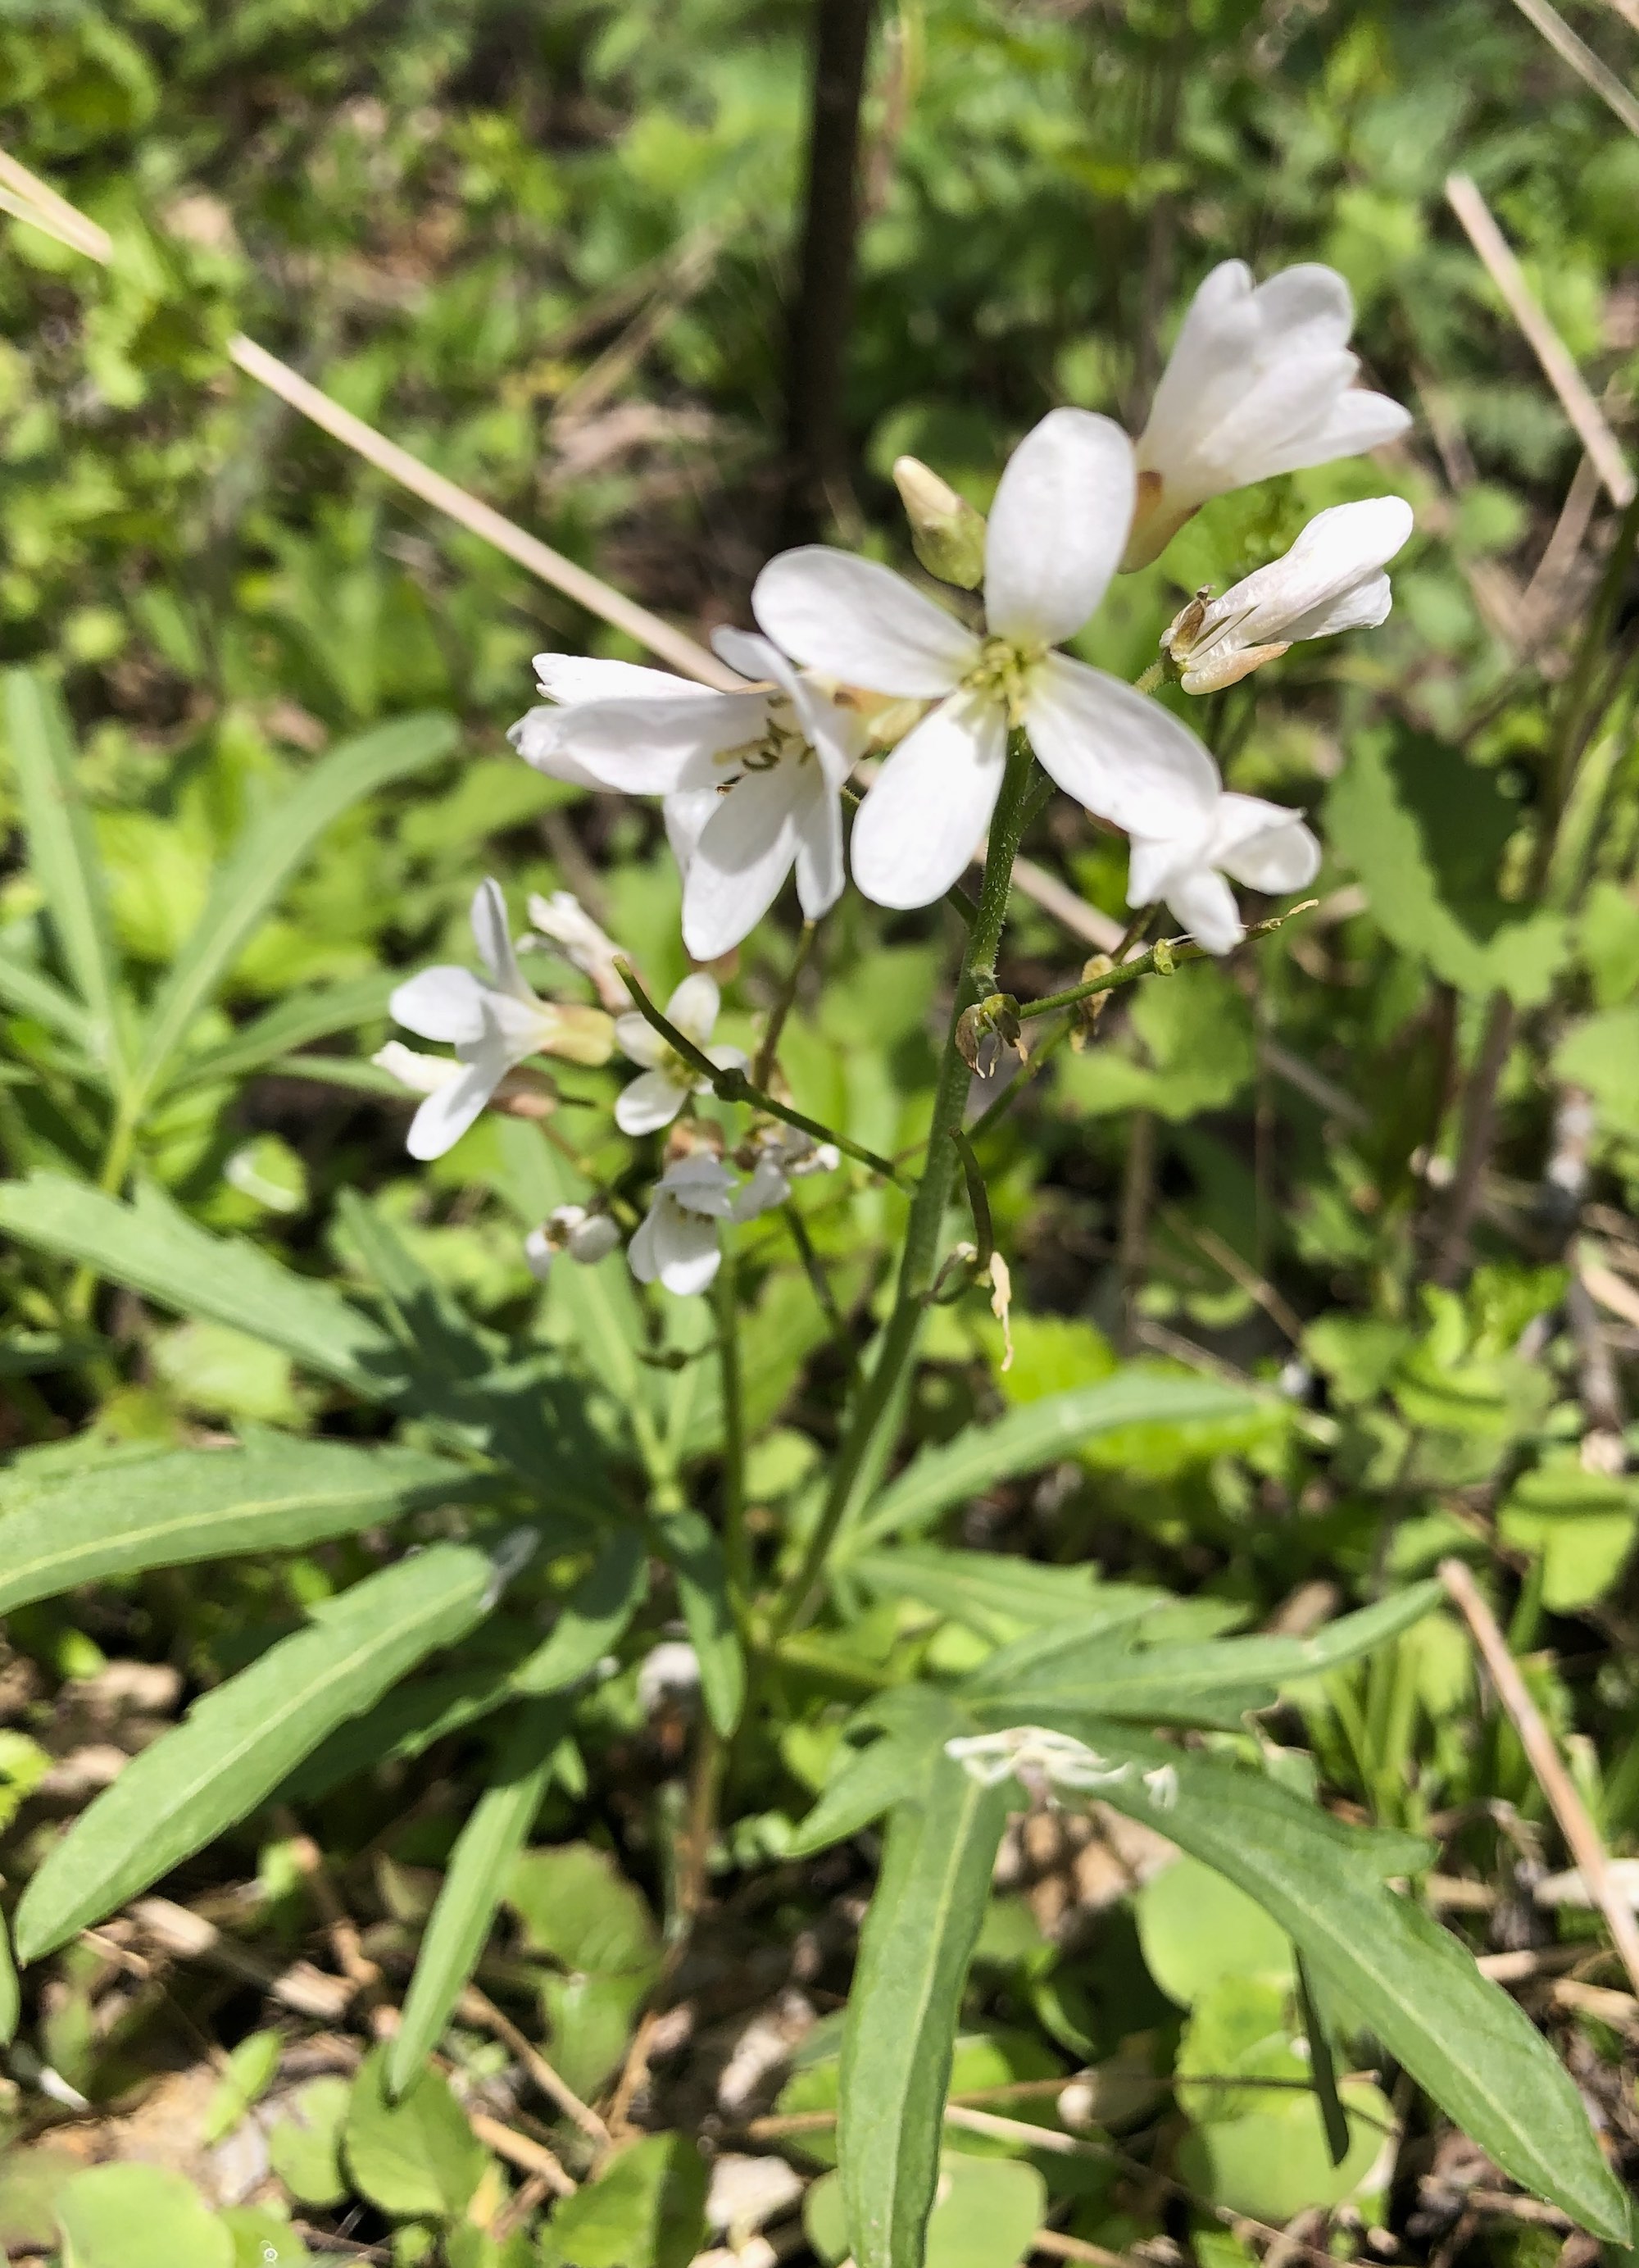 Cutleaf Toothwort in Oak Savanna by Council Ring in Madison, Wisconsin on May 1, 2020.